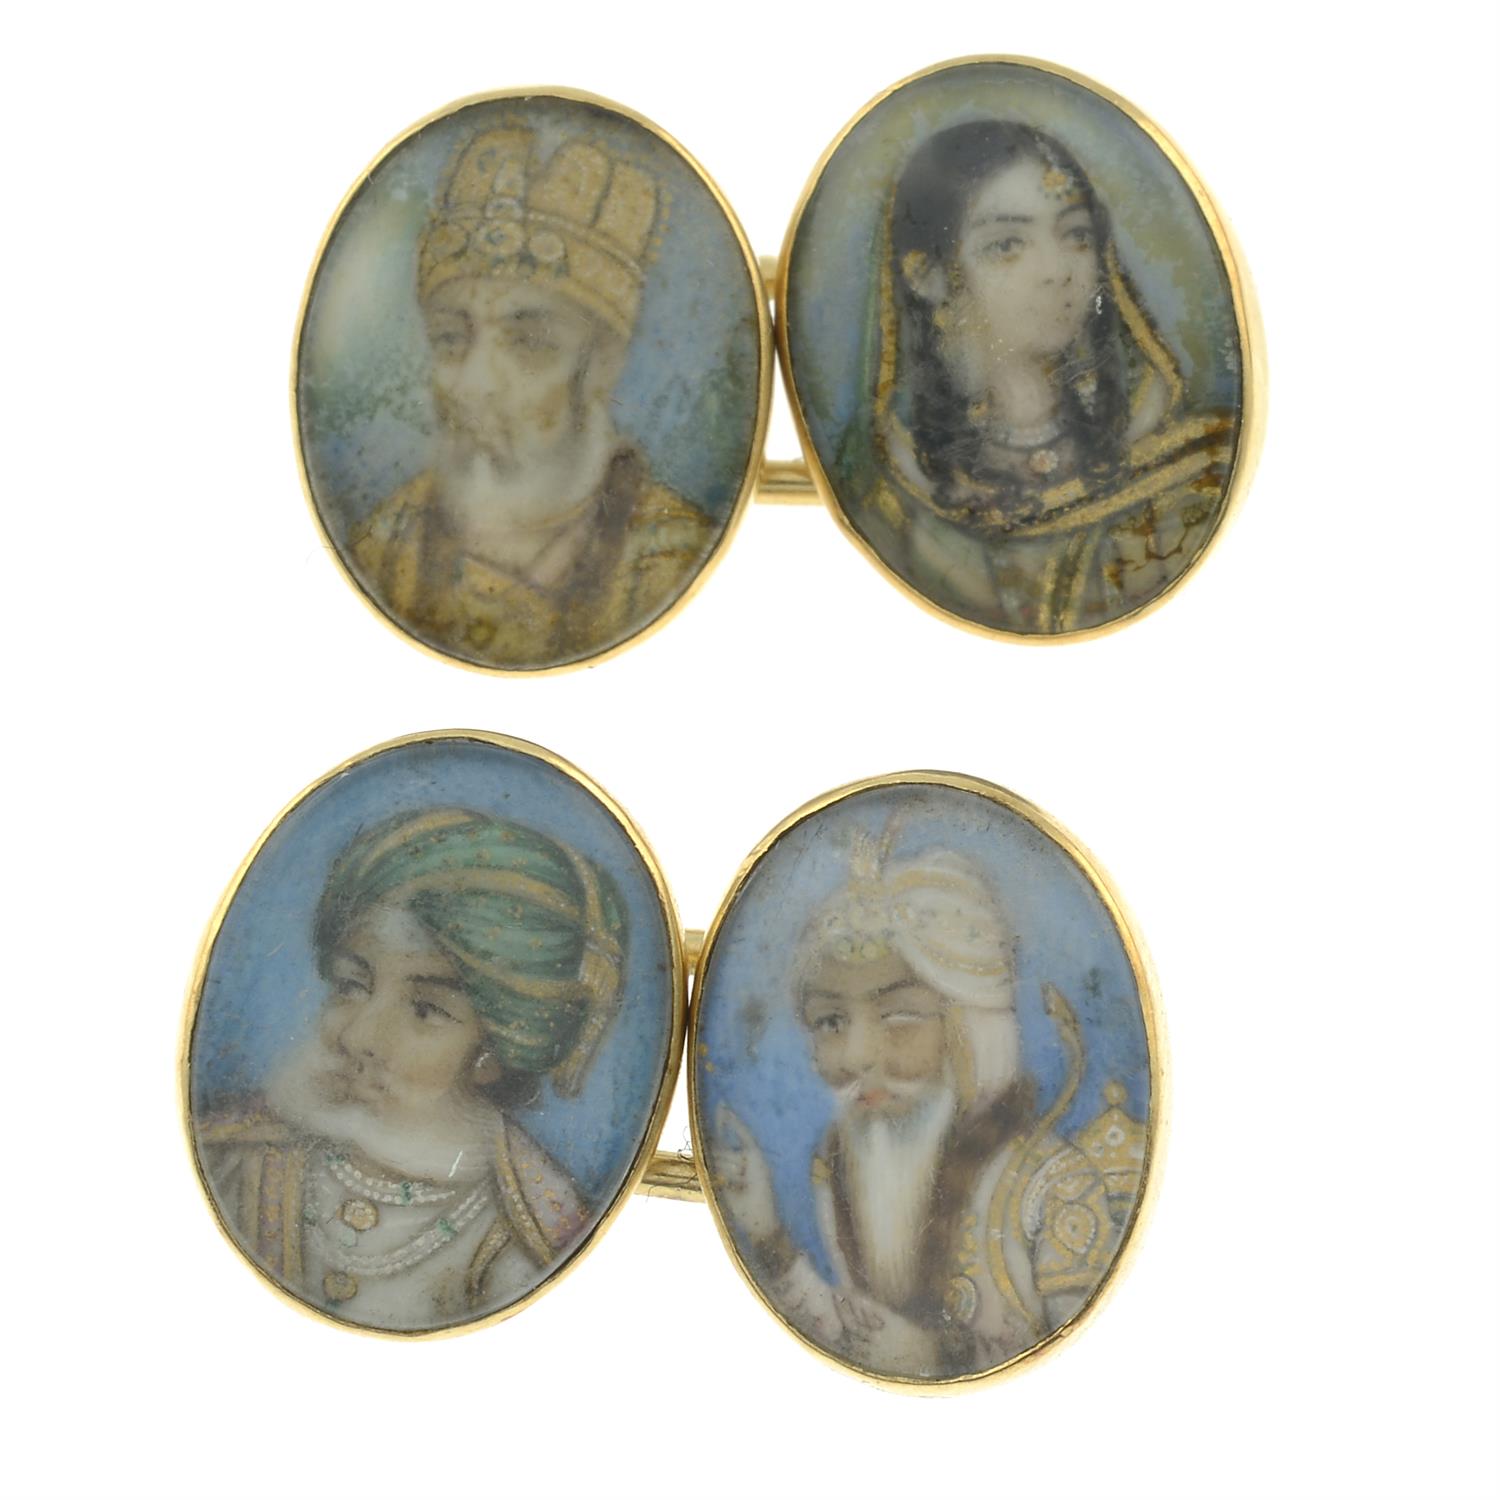 A pair of late Victorian gold cufflinks, painted to depict portrait miniatures of Shah Jahan,